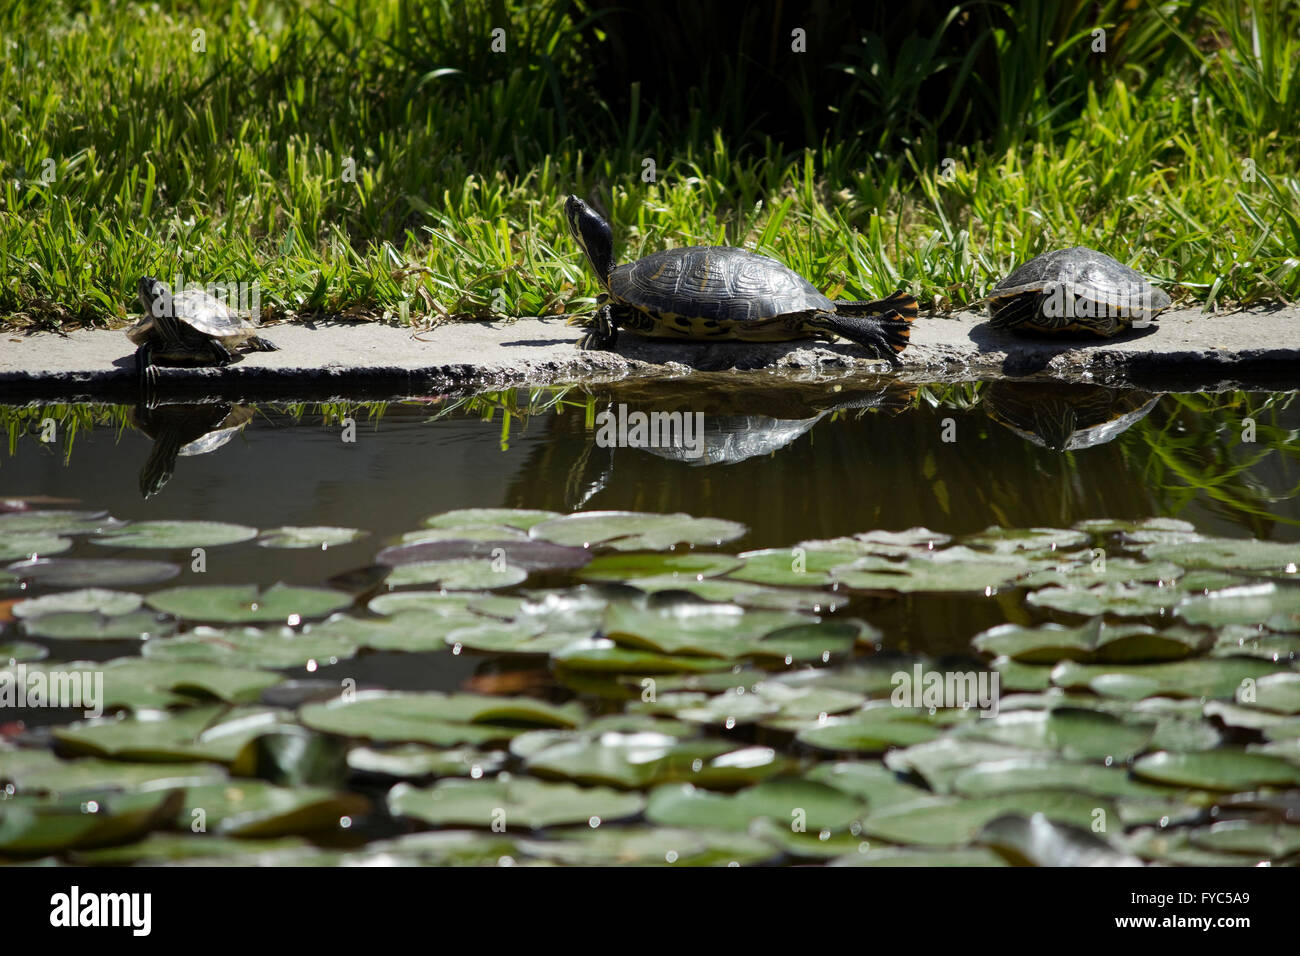 Group of semiaquatic red-eared slider terrapin turtles (Emydidae family) regulating body temperature by absorbing heat outdoors Stock Photo